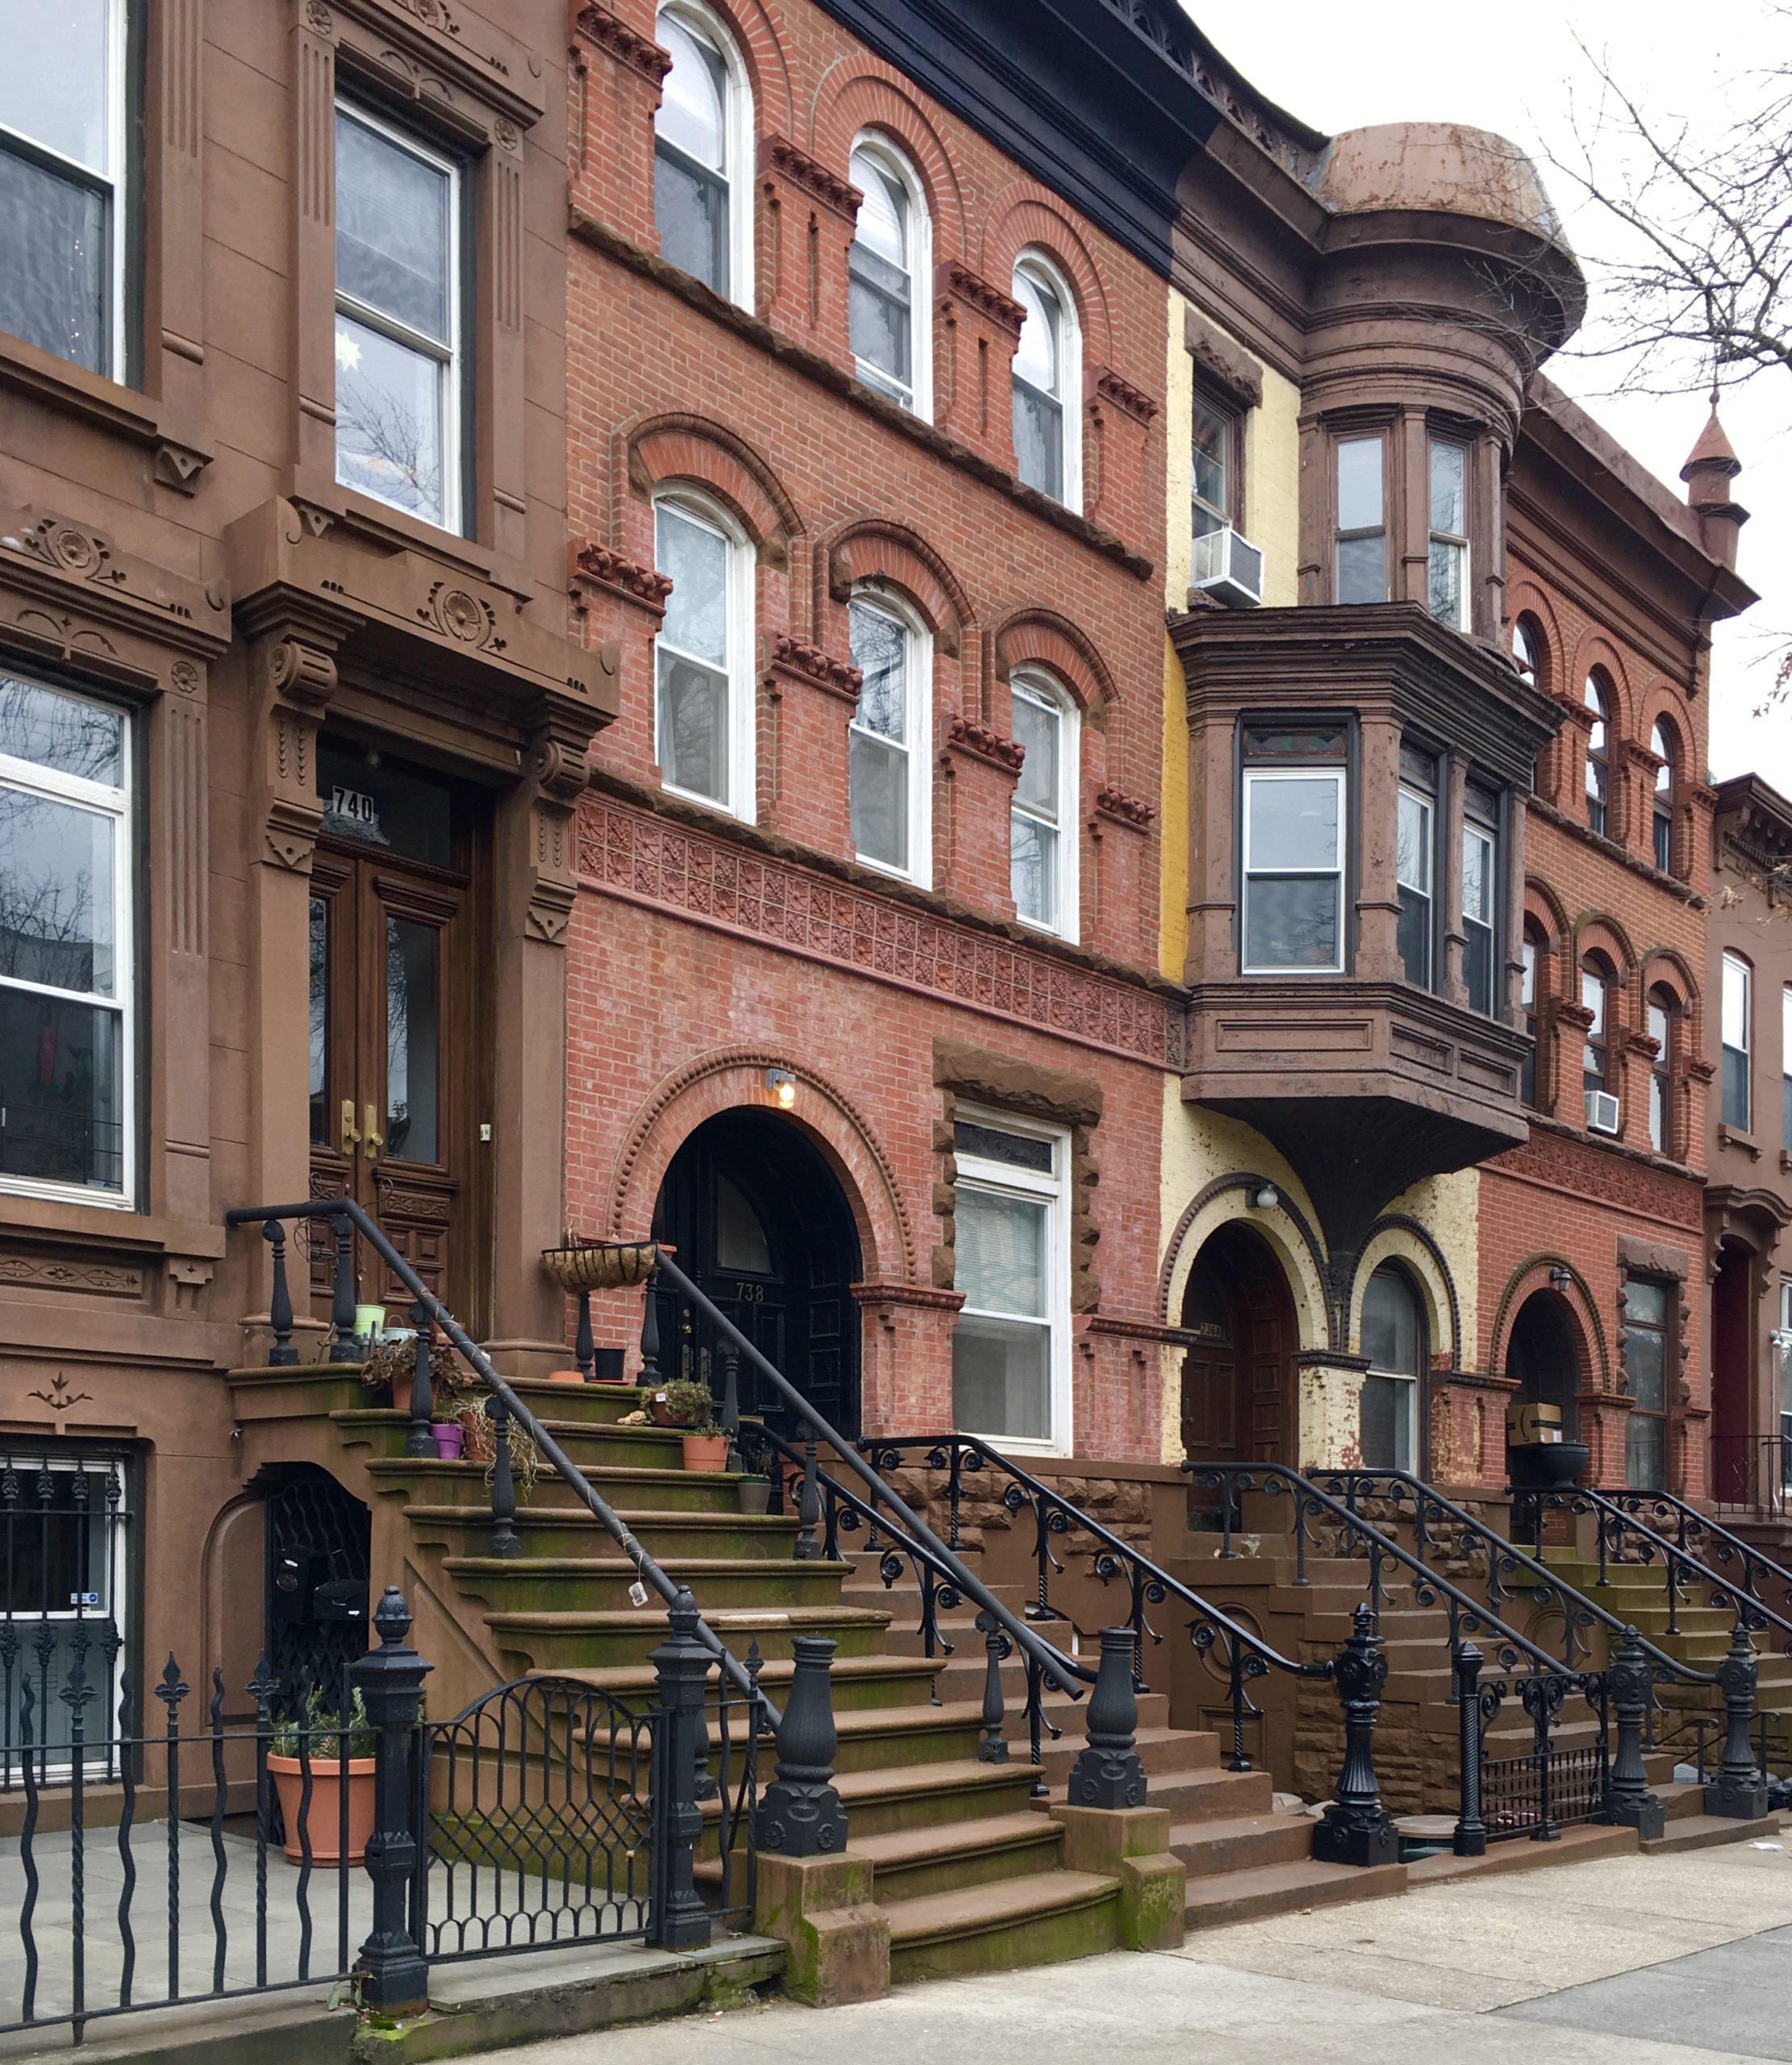 Old-fashioned charm shines forth from this row of residential buildings, which starts with 740 Union St. at left. Photo: Lore Croghan/Brooklyn Eagle